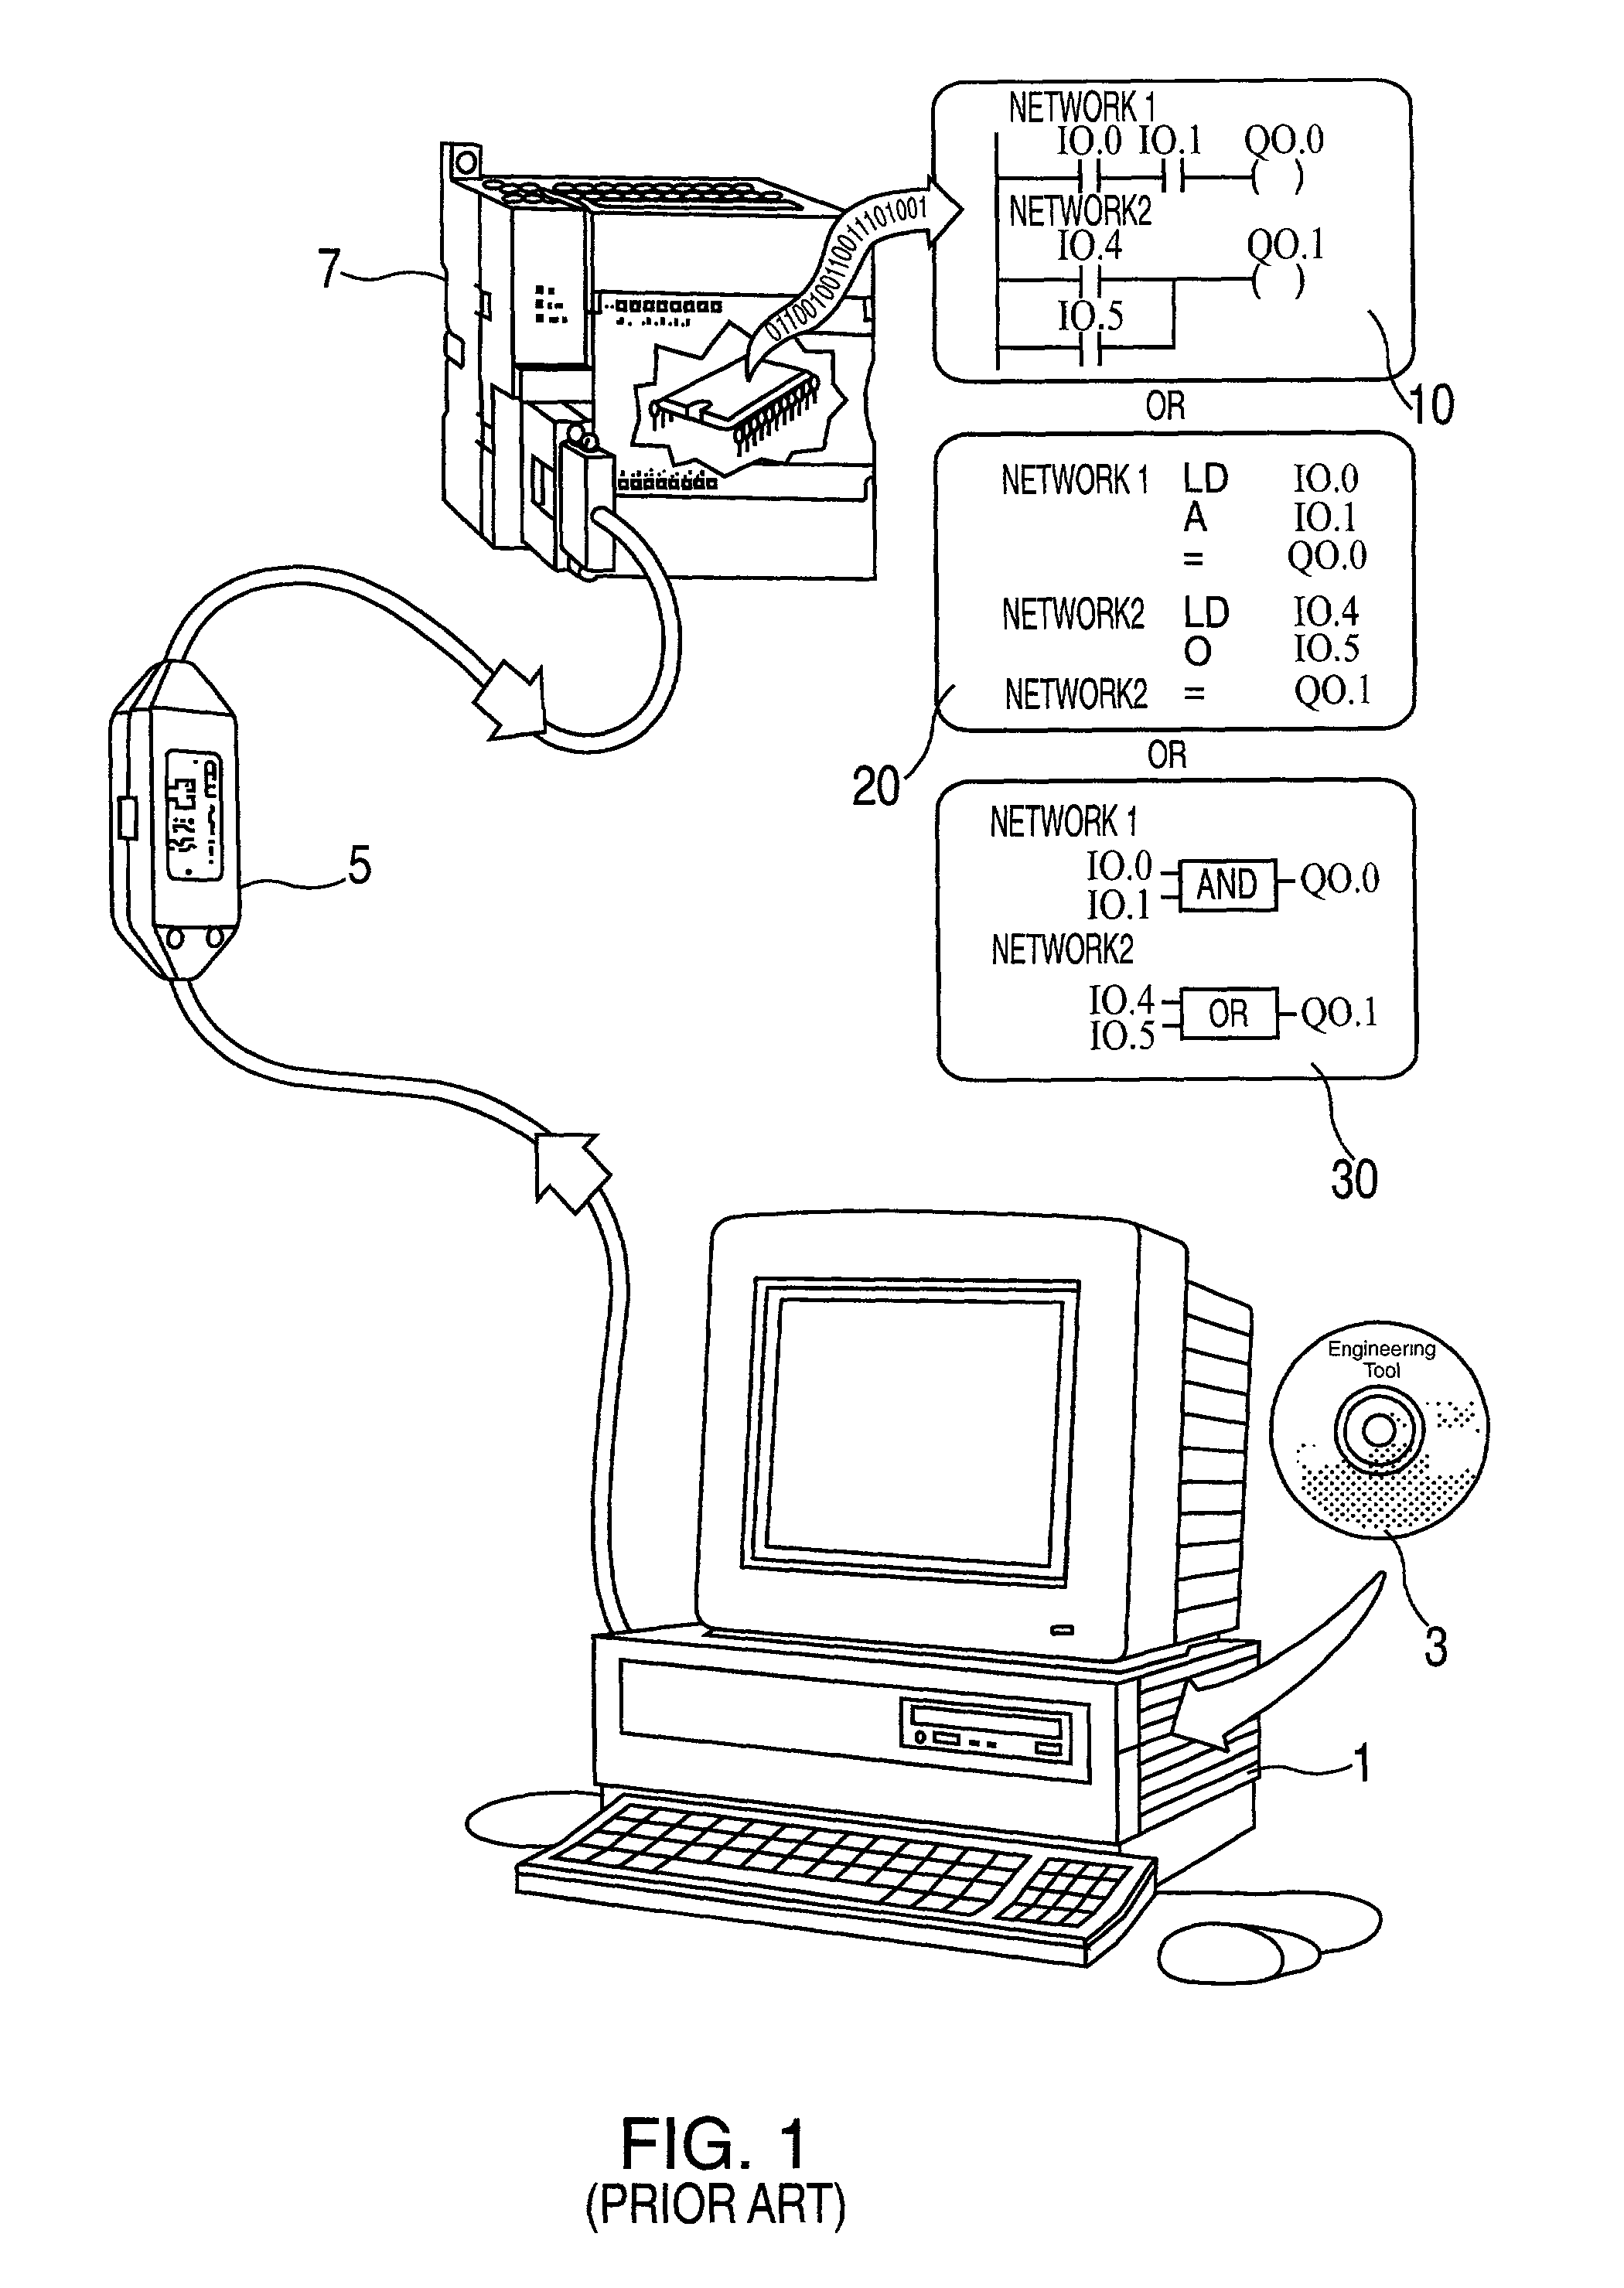 Method and apparatus for programming programmable controllers and generating configuration data from a centralized server